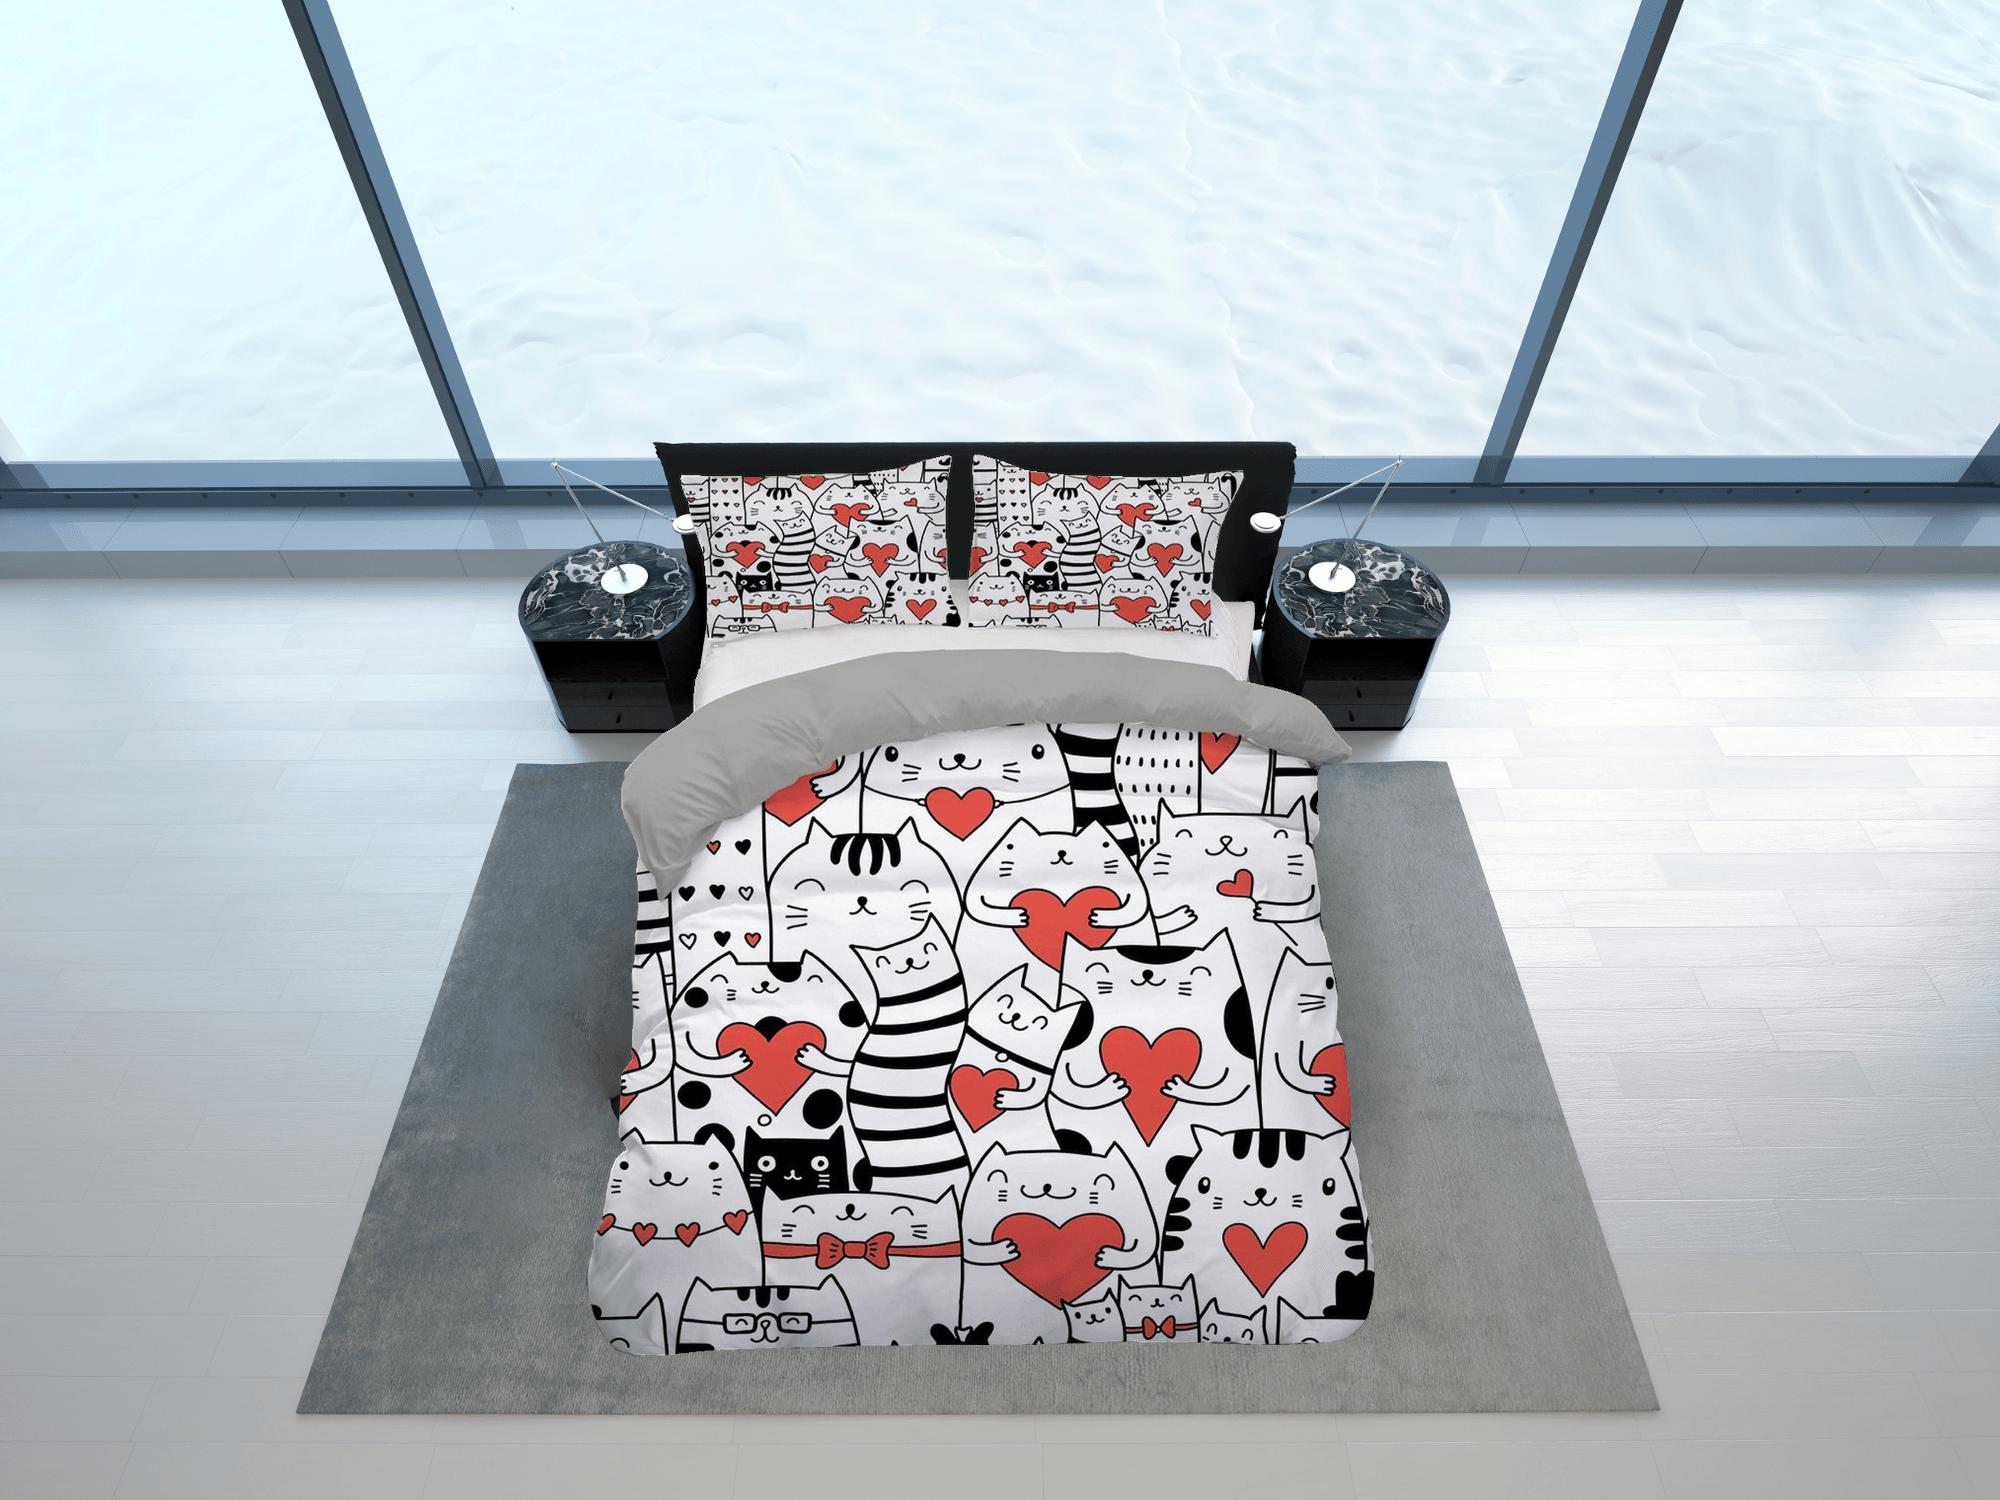 daintyduvet Black and white bedding cats with hearts, unisex toddler bedding, kids duvet cover set, gift for cat lovers, baby bedding, baby shower gift